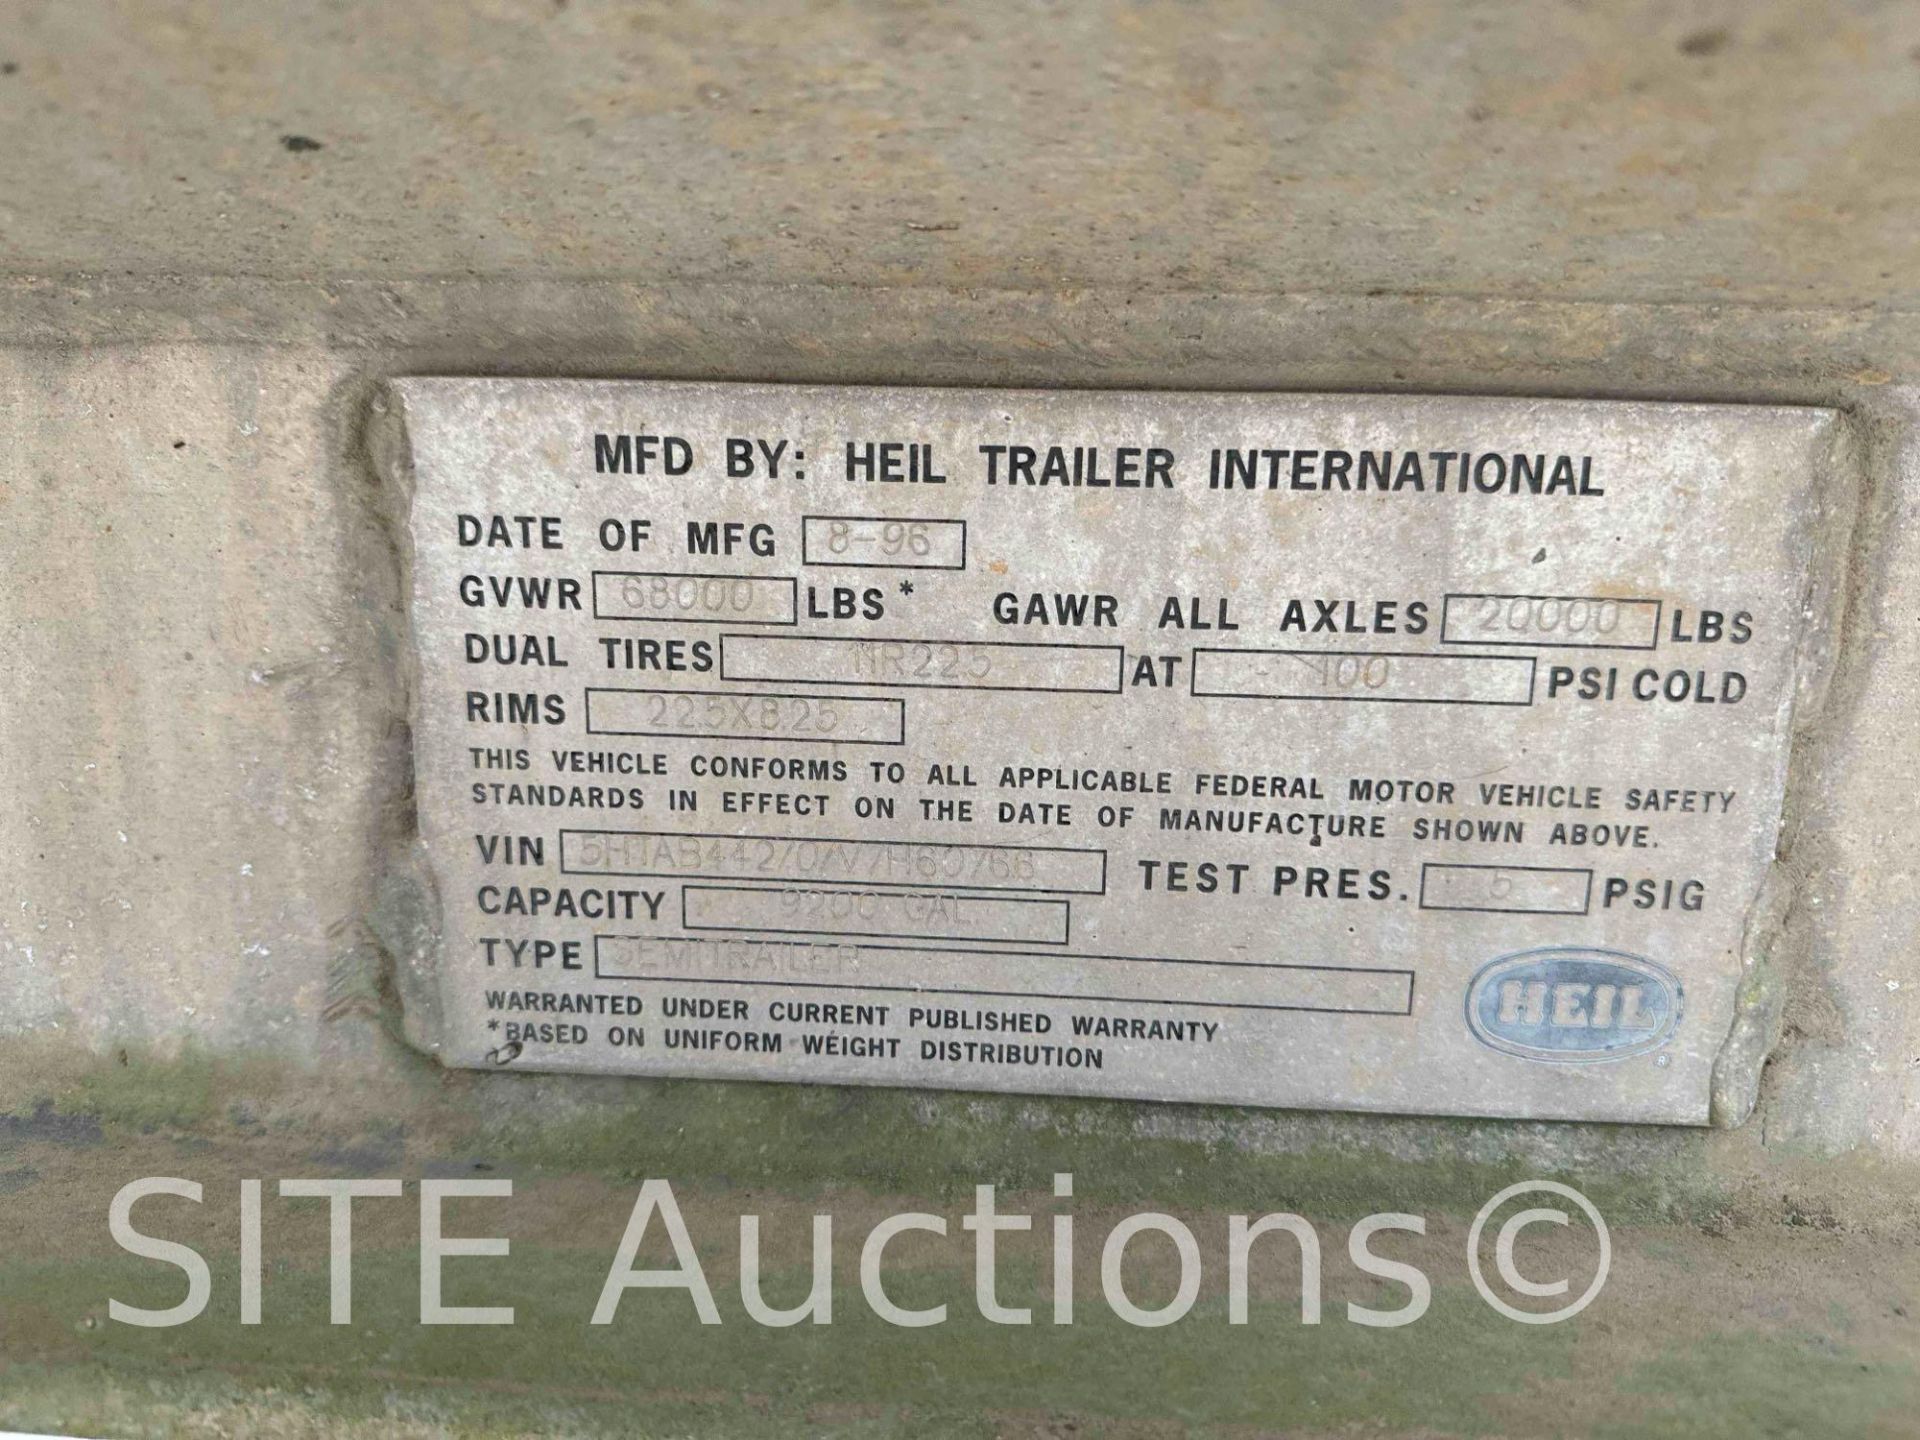 1996 Heil T/A Tank Trailer - Image 12 of 15